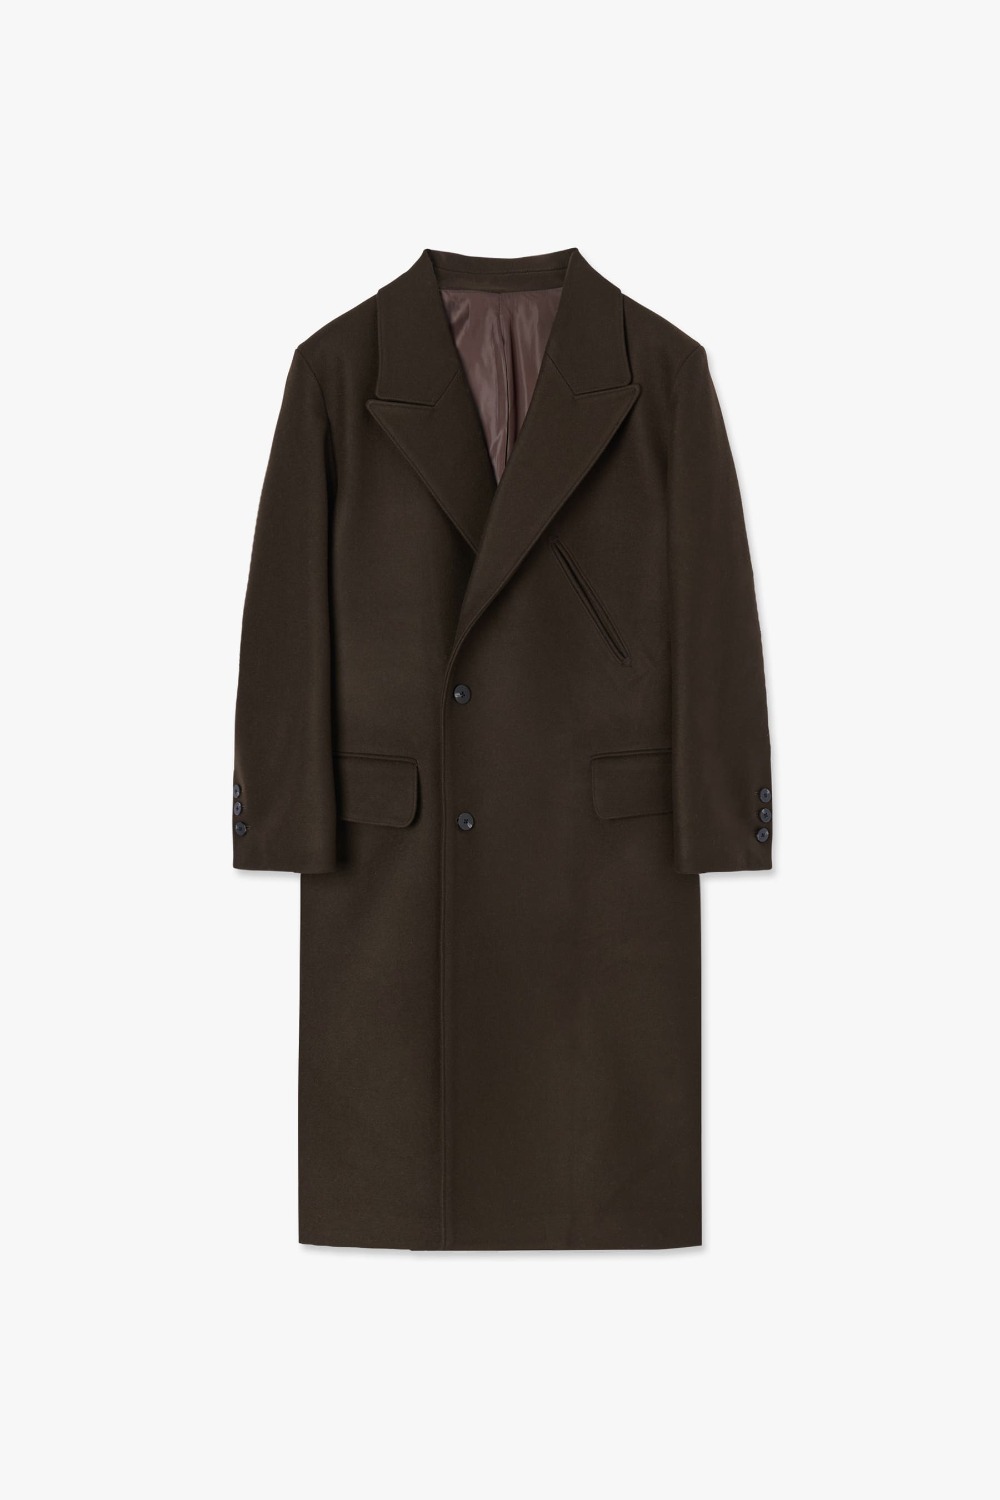 DARK BROWN TIMELEAP DOUBLE BREASTED COAT